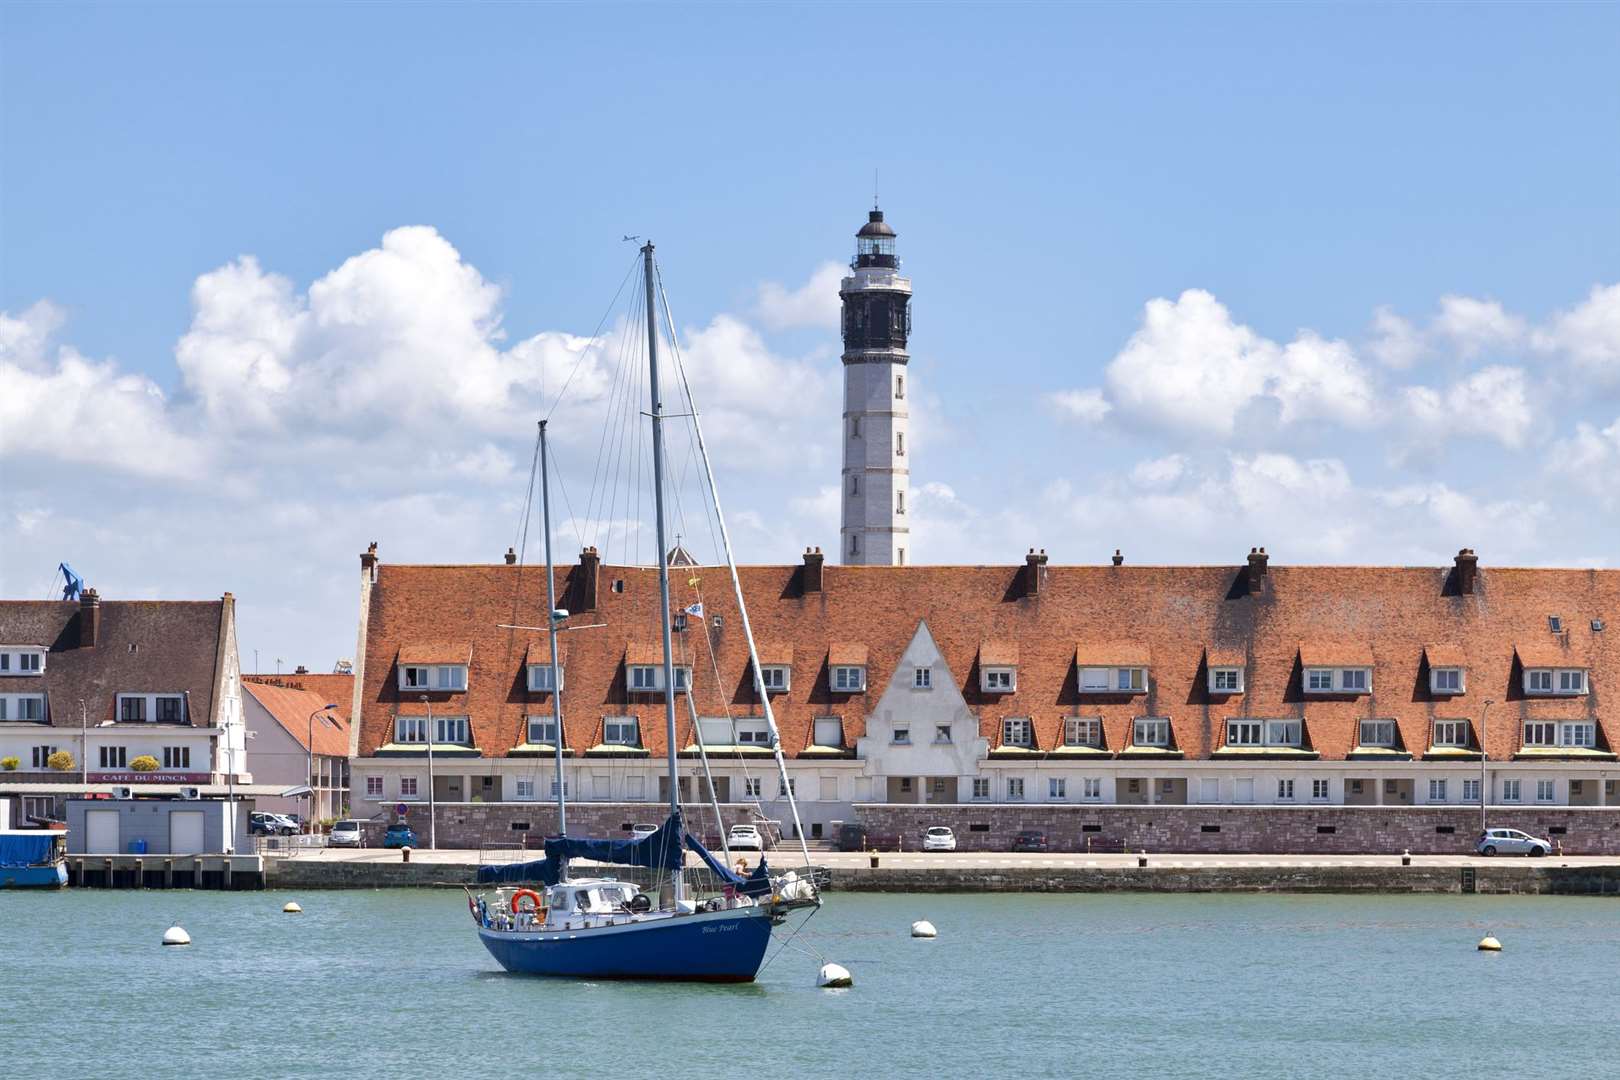 There's 271 steps to climb for views of the port and coast at the Calais Lighthouse